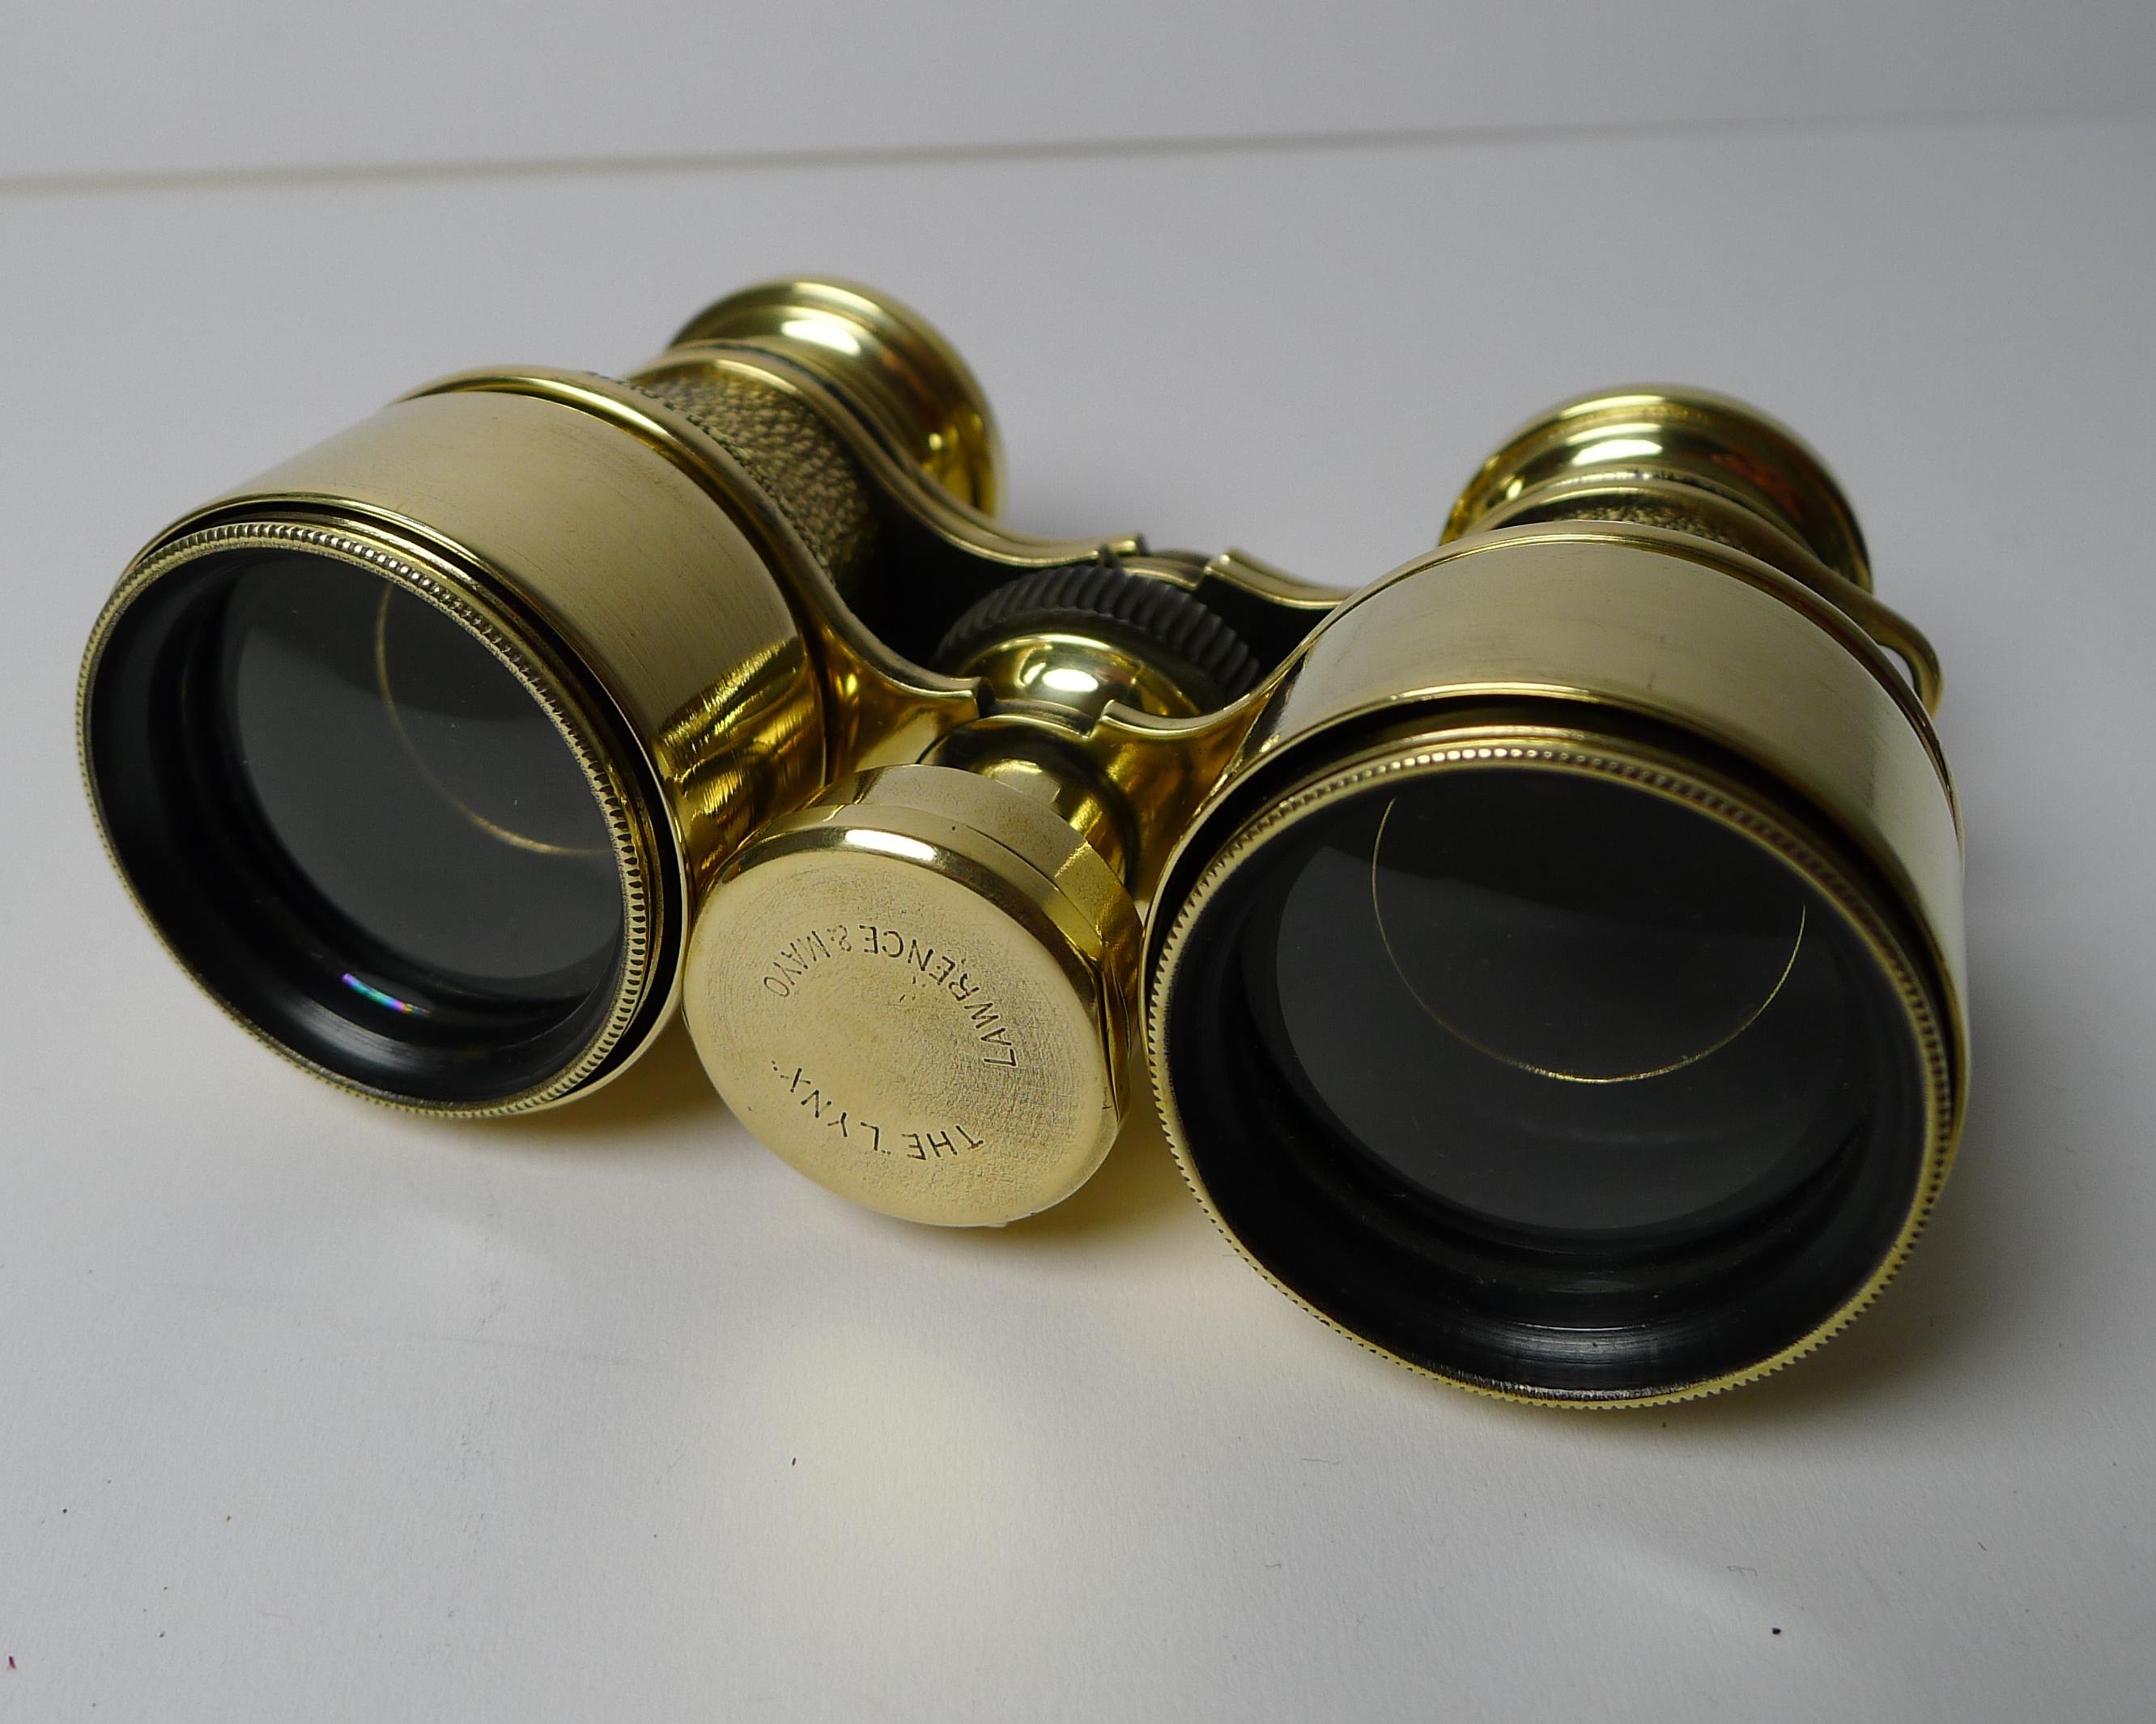 Antique English Field Glasses / Binoculars by Lawrence and Mayo, with Compass 3